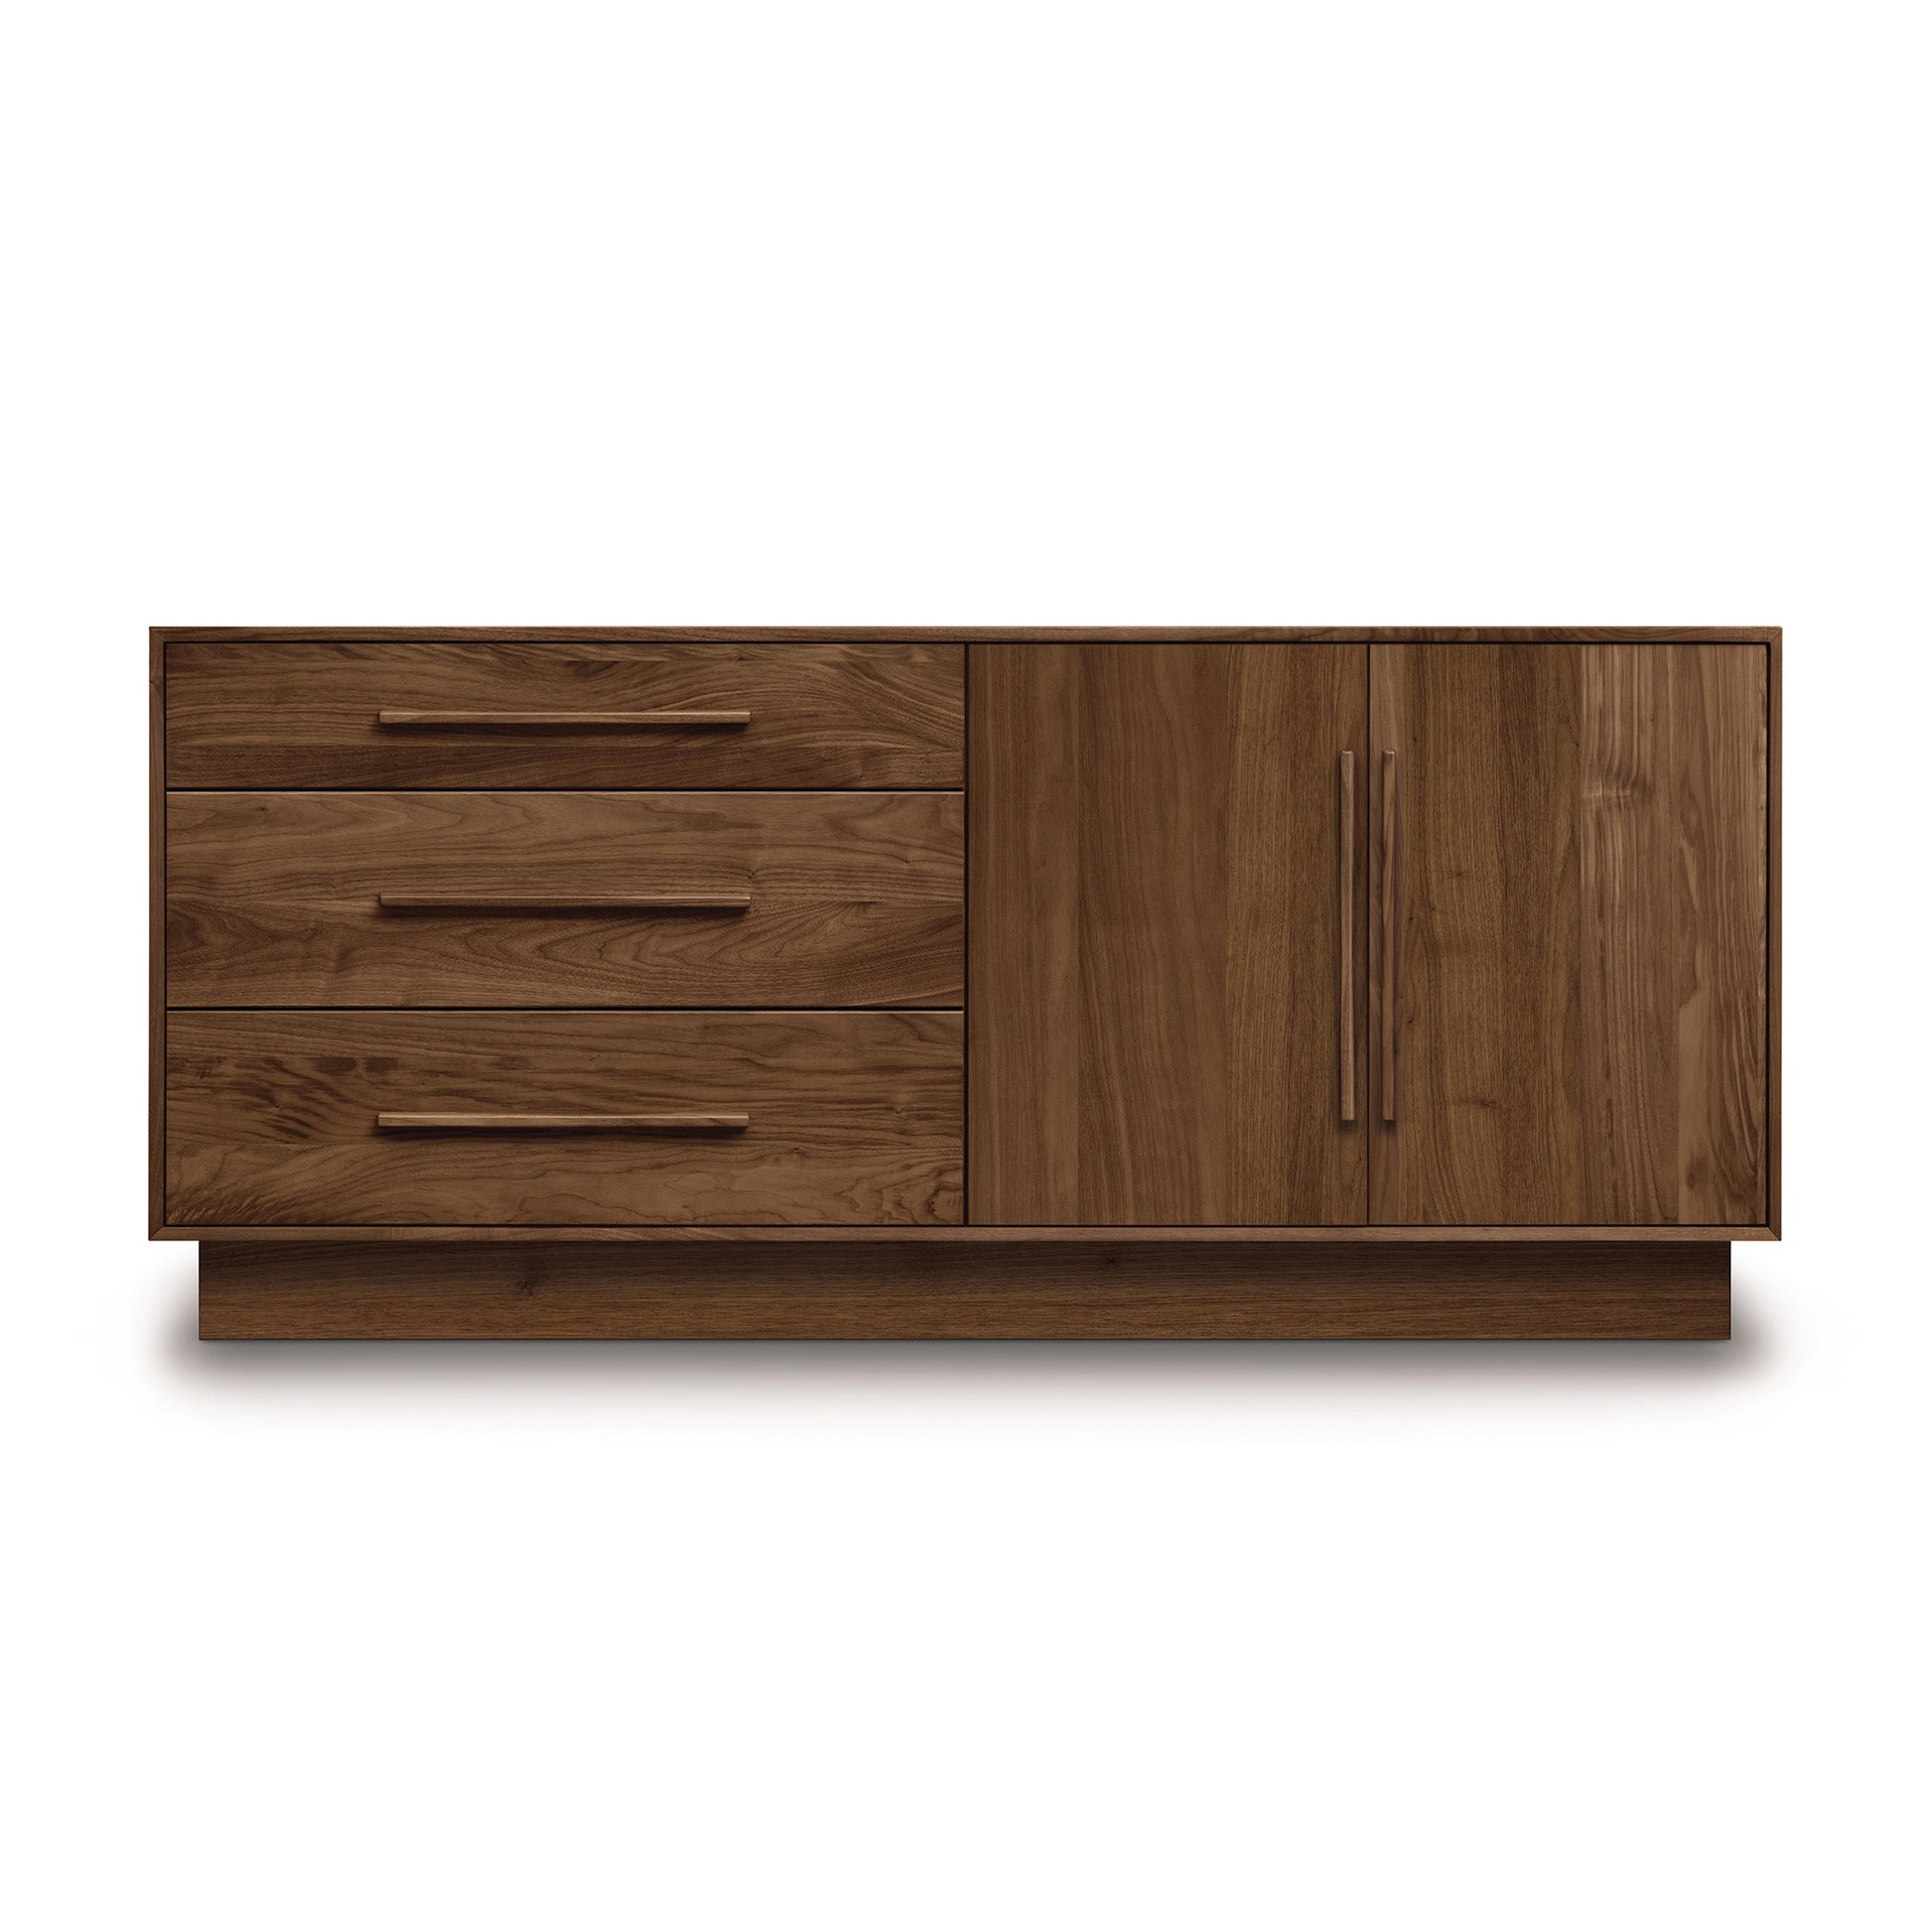 A modern wooden Copeland Furniture Moduluxe 3-Drawer, 2-Door Dresser - 29" Series with a combination of drawers on the left and cabinet doors on the right against an isolated background.